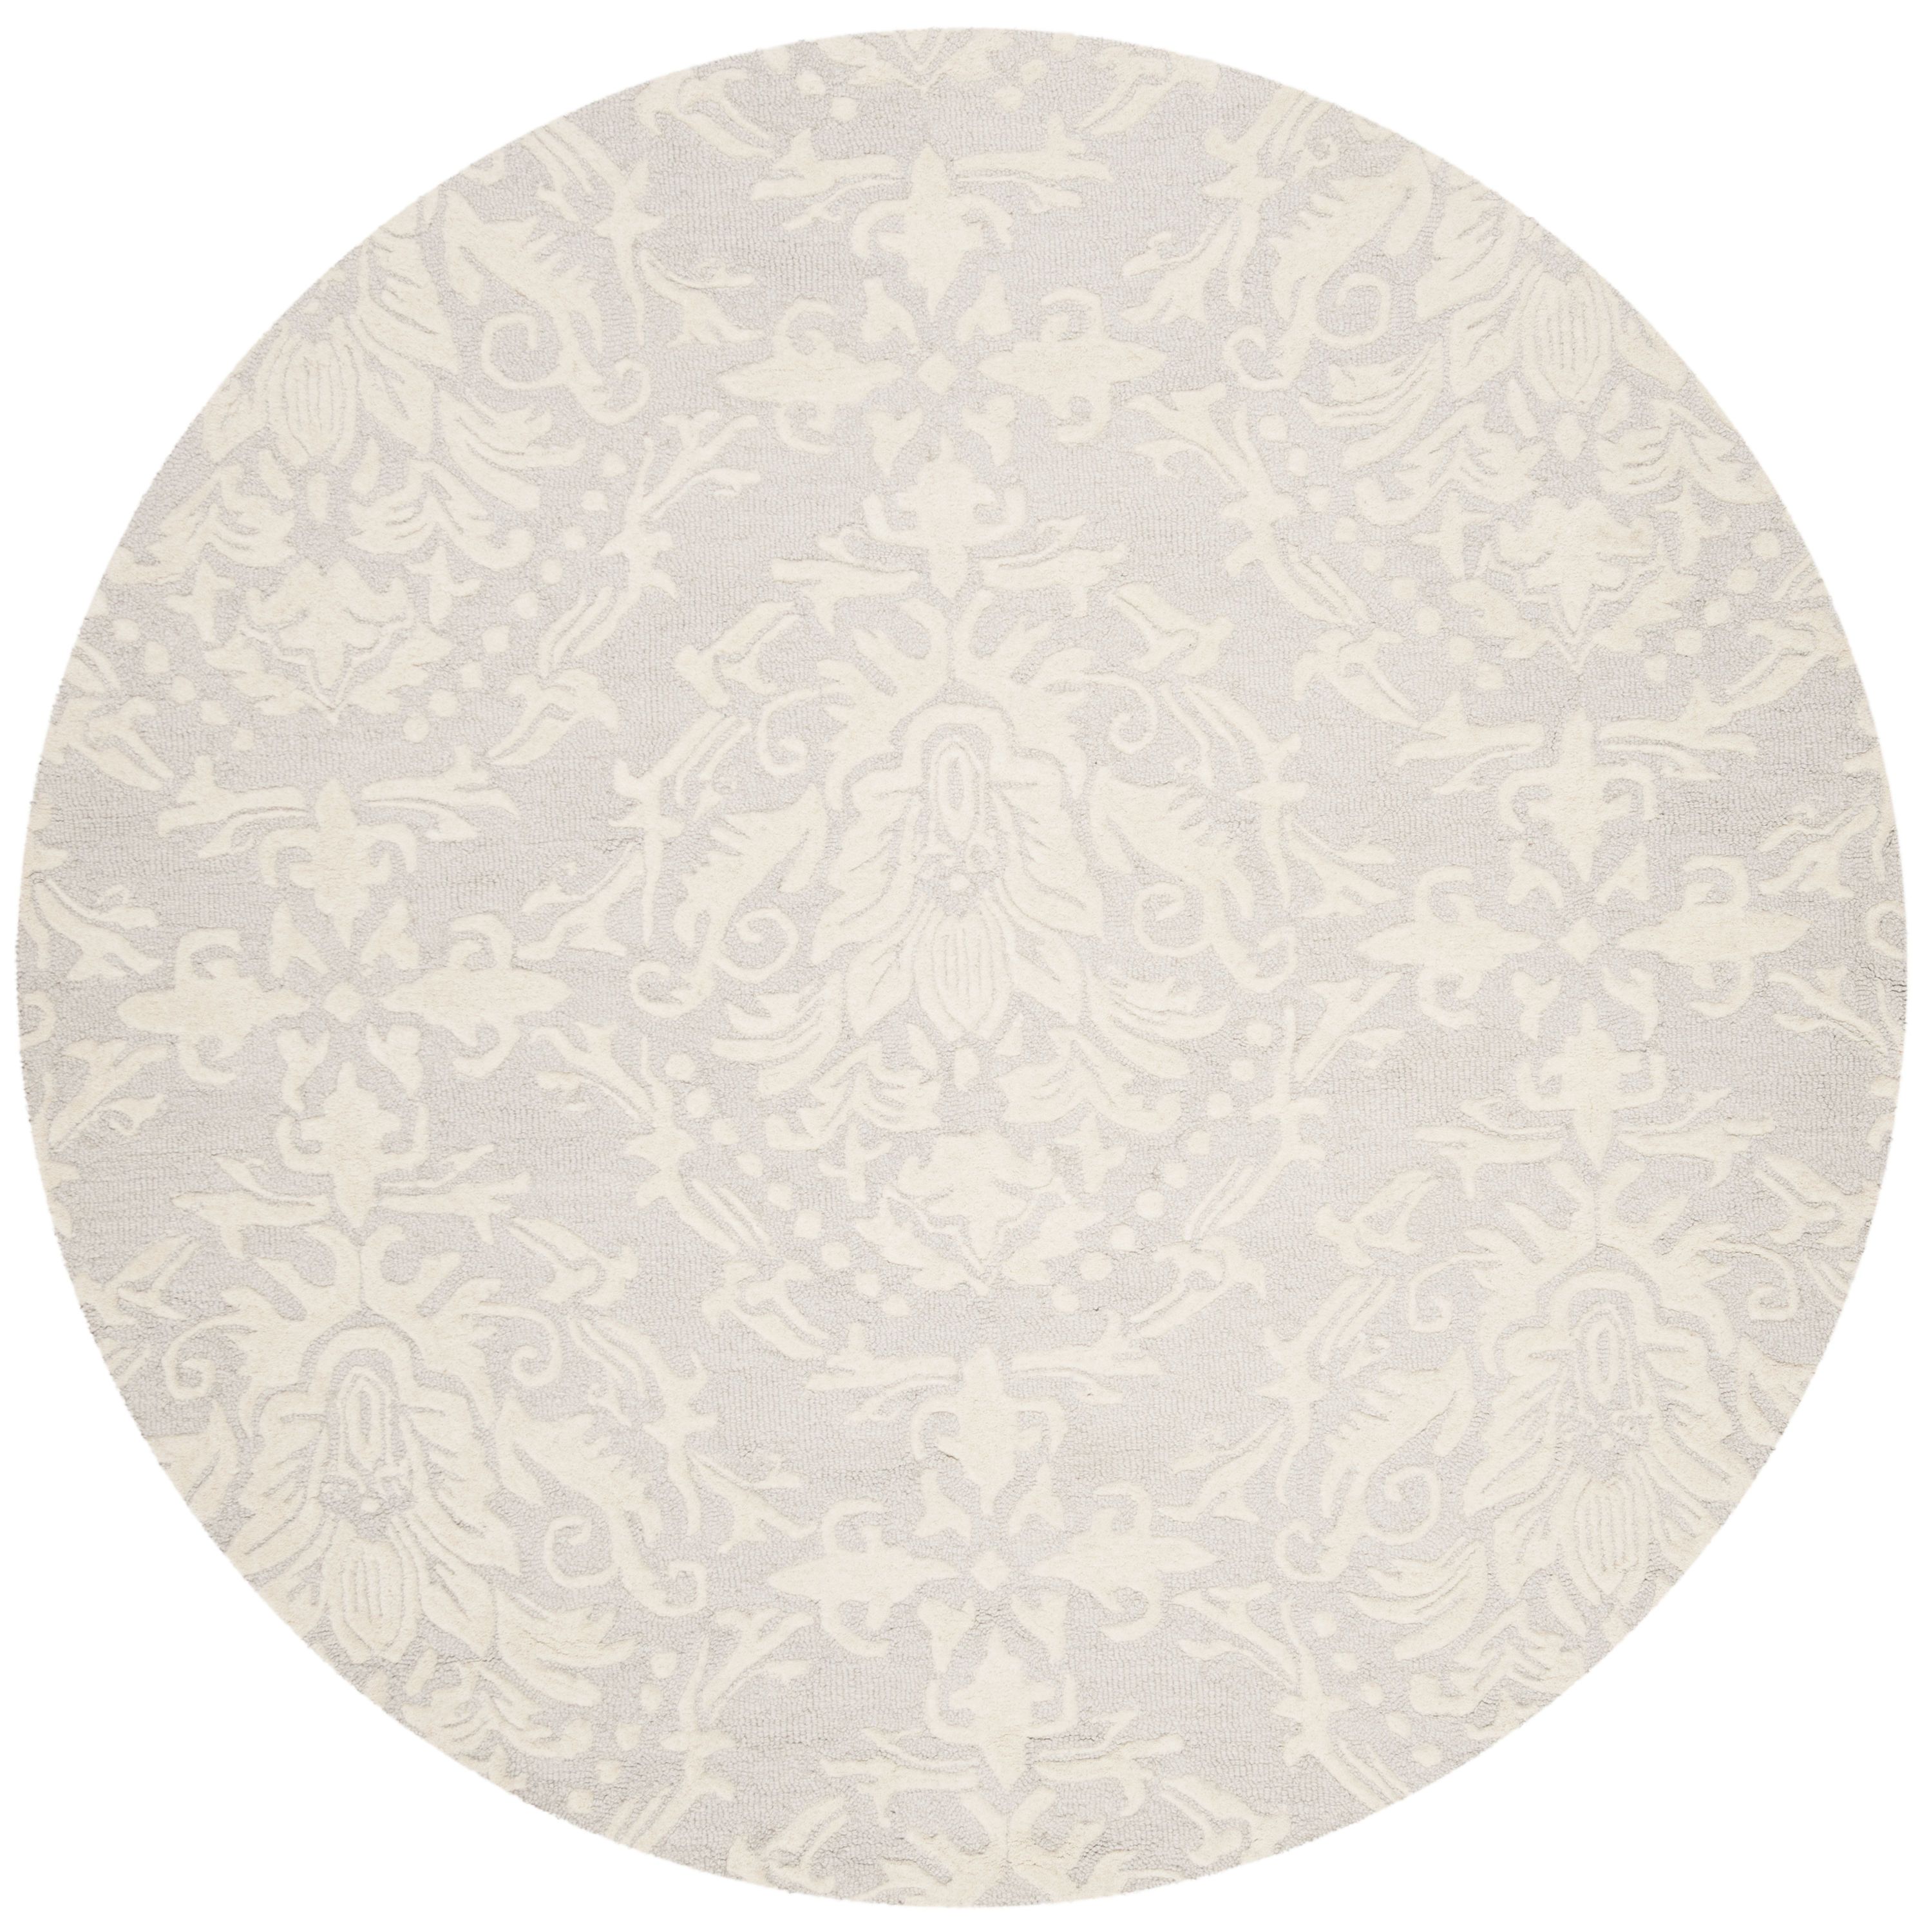 Safavieh Blossom Lollie 6 X 6 Wool Light Gray/ivory Round Indoor  Floral/botanical Bohemian/eclectic Area Rug In The Rugs Department At  Lowes Regarding Ivory Blossom Round Rugs (View 12 of 15)